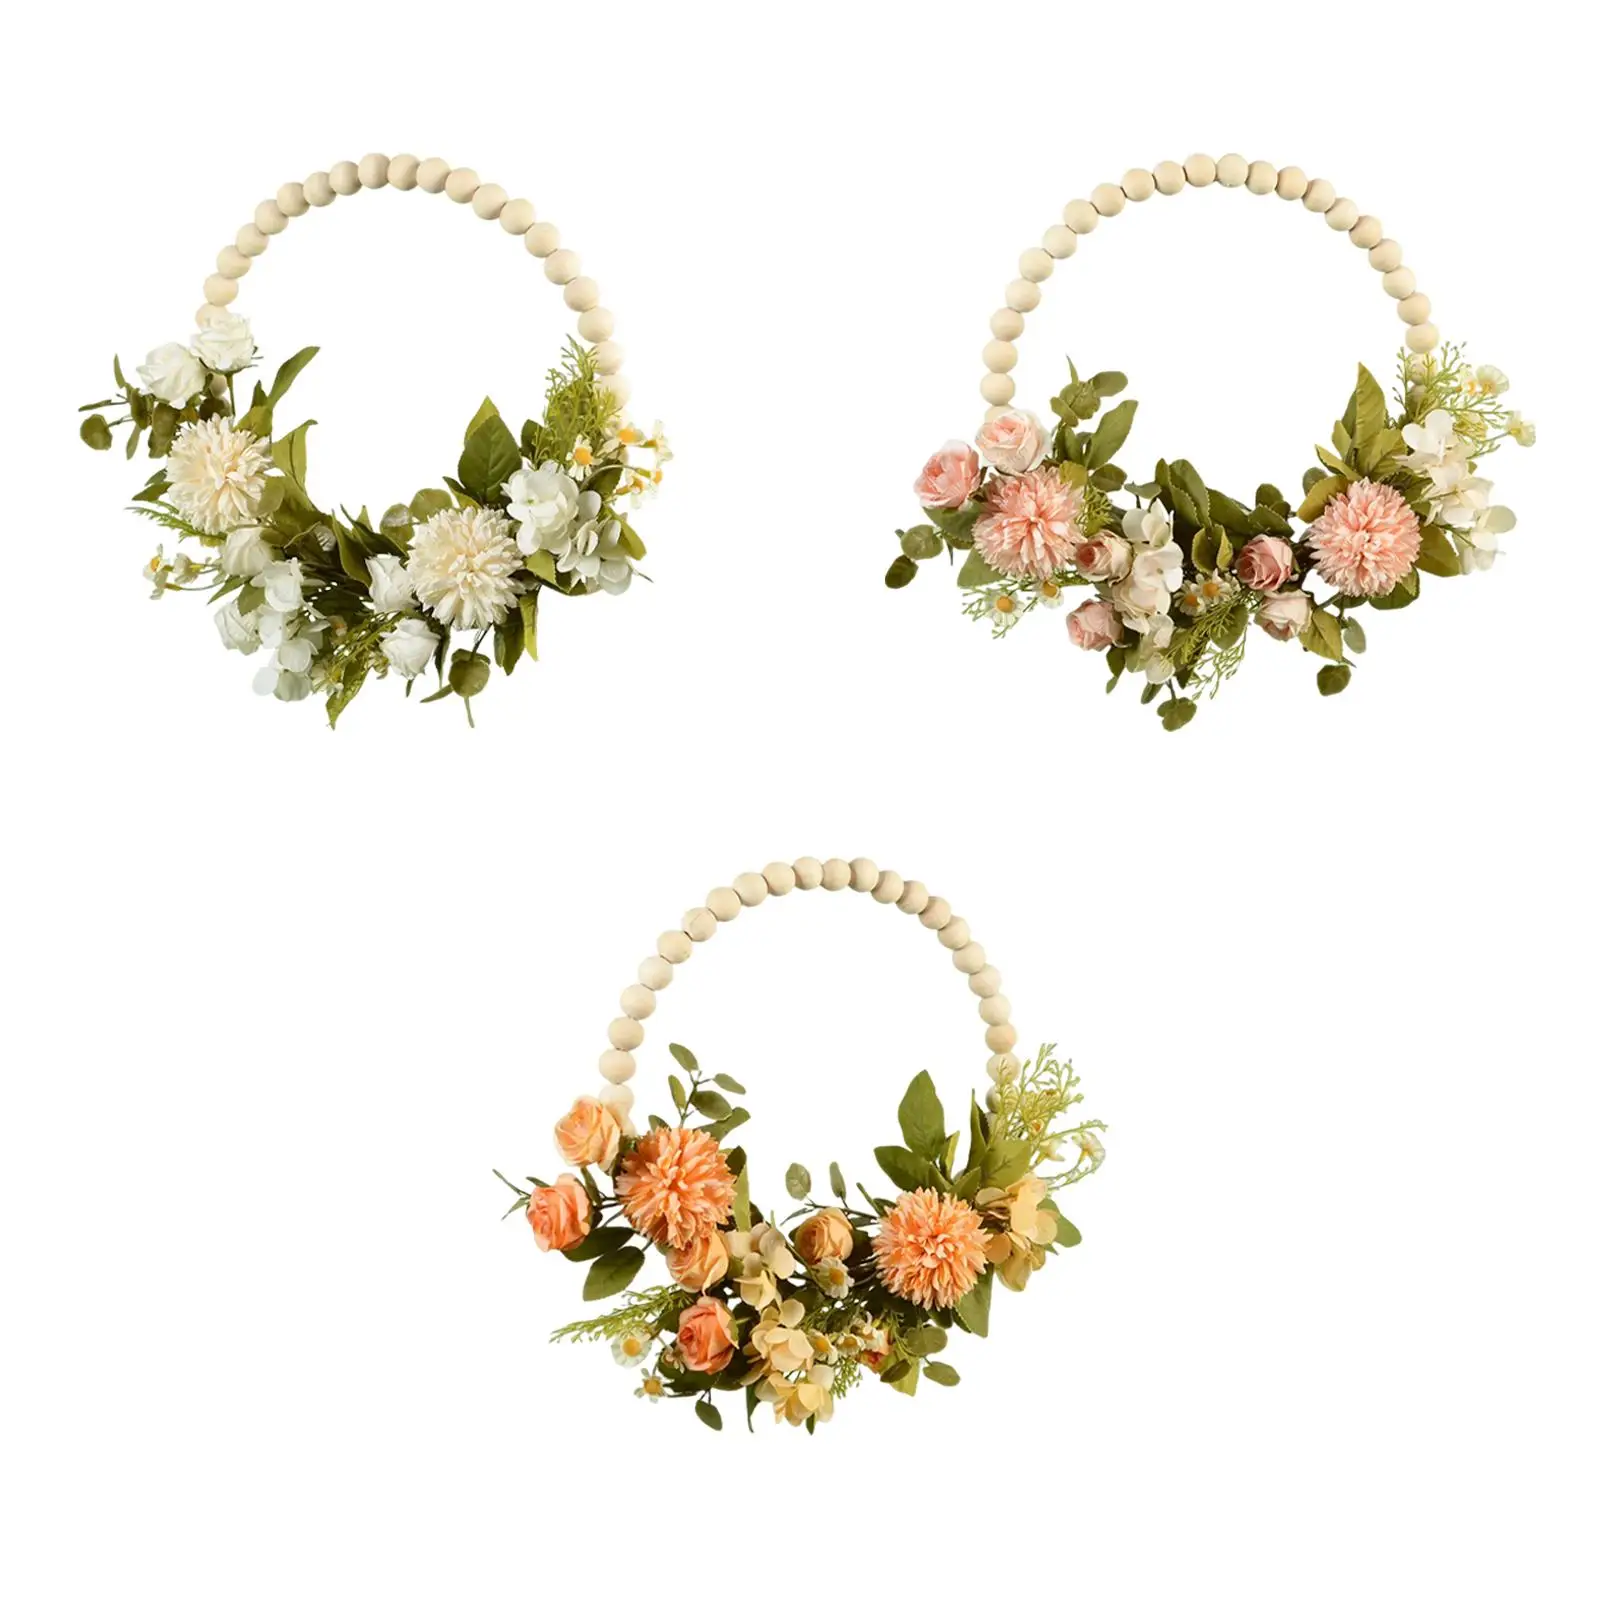 Flower Wreath Door Garland Wood Beads Circle Hanging Spring Wreath Greenery Leaves for Backdrop Home Indoor Decoration